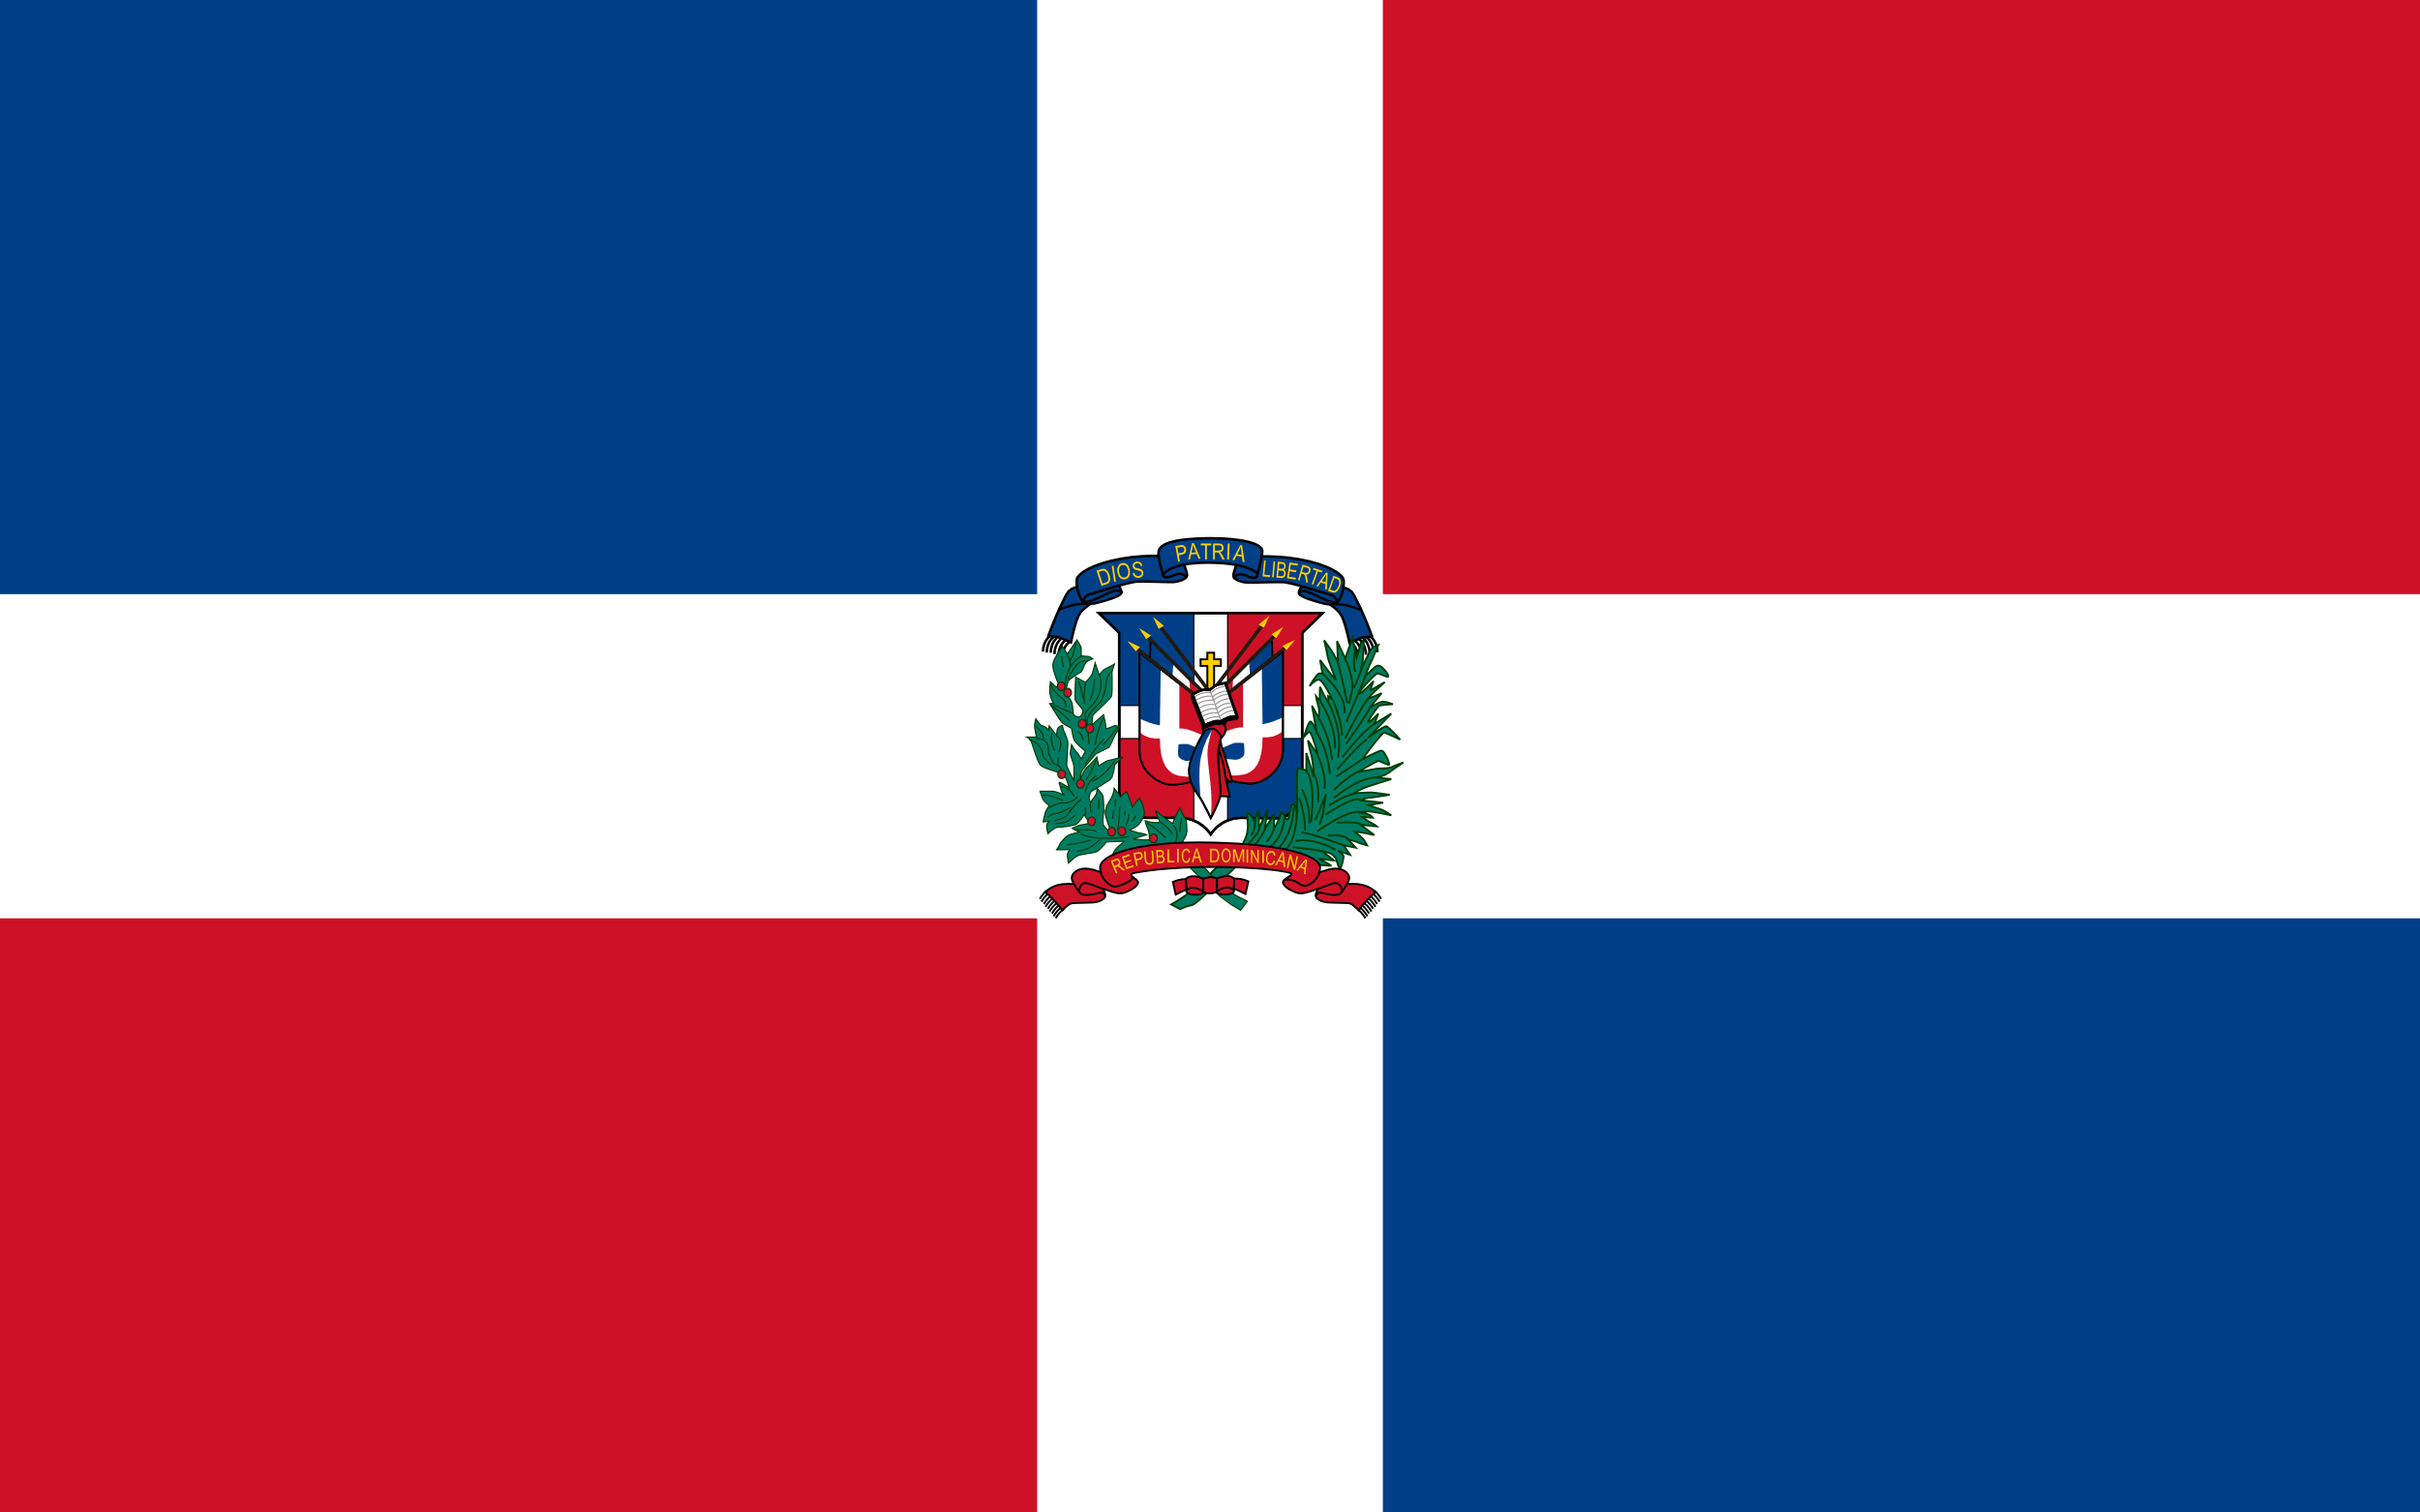 the image shows the dominican flag